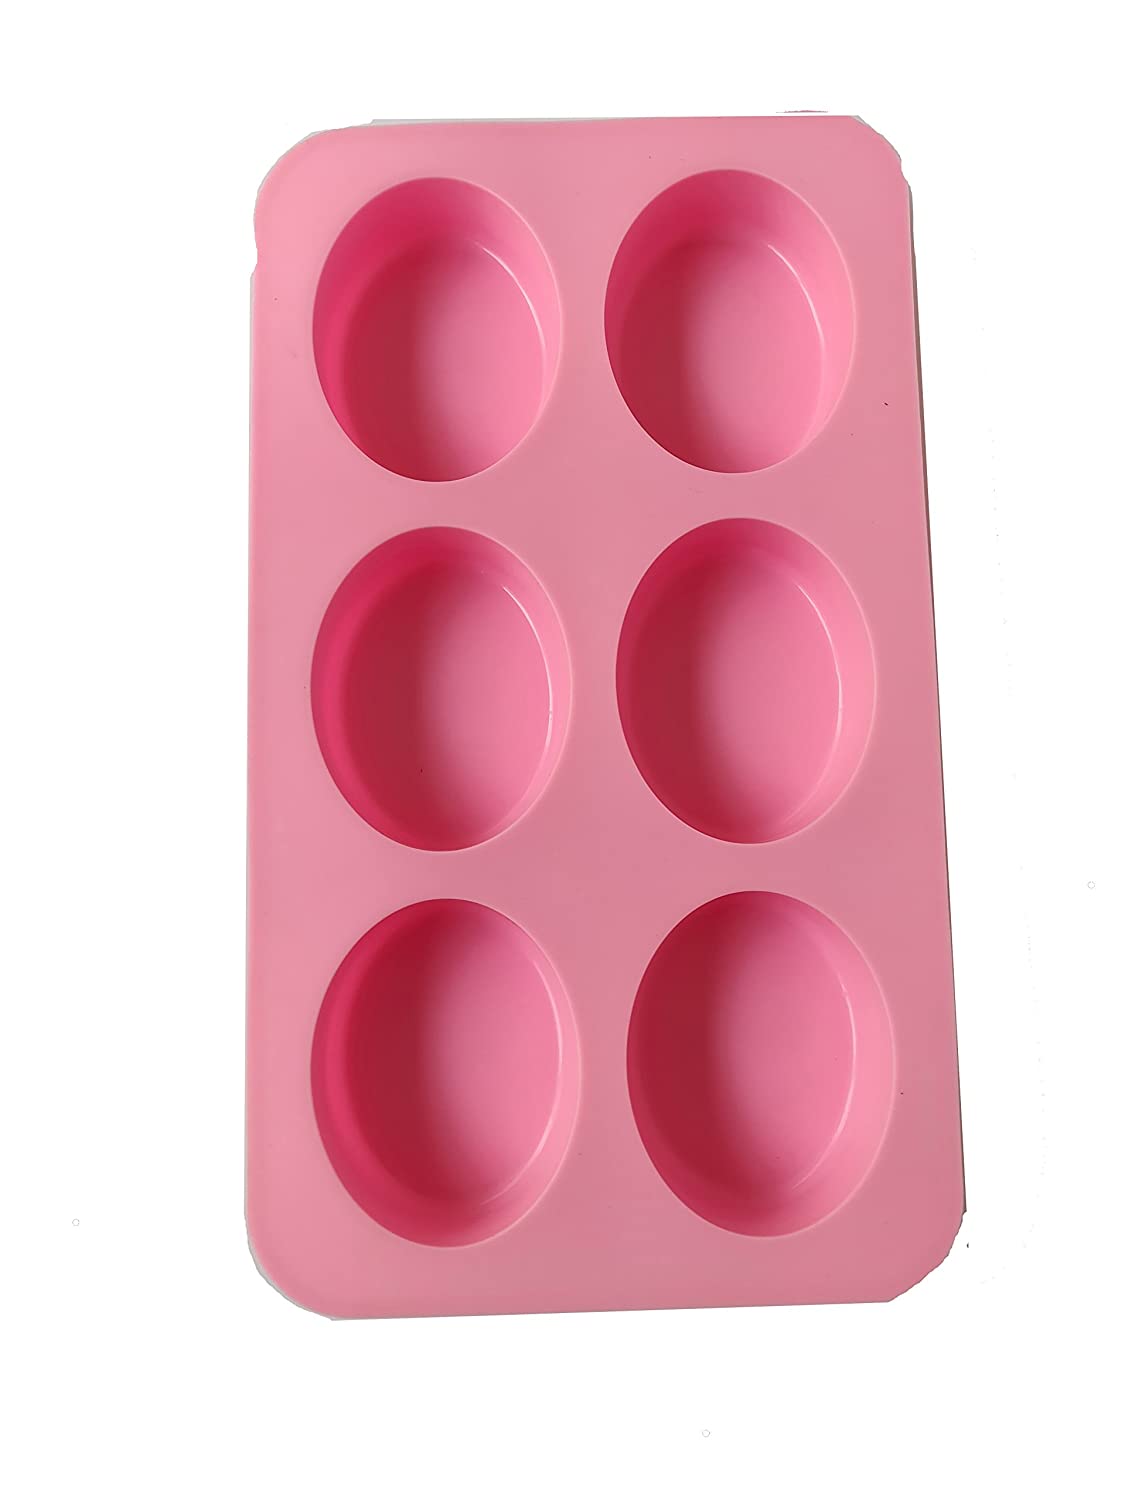 6 Cavities Oval Shape Soap Making Silicone Mold